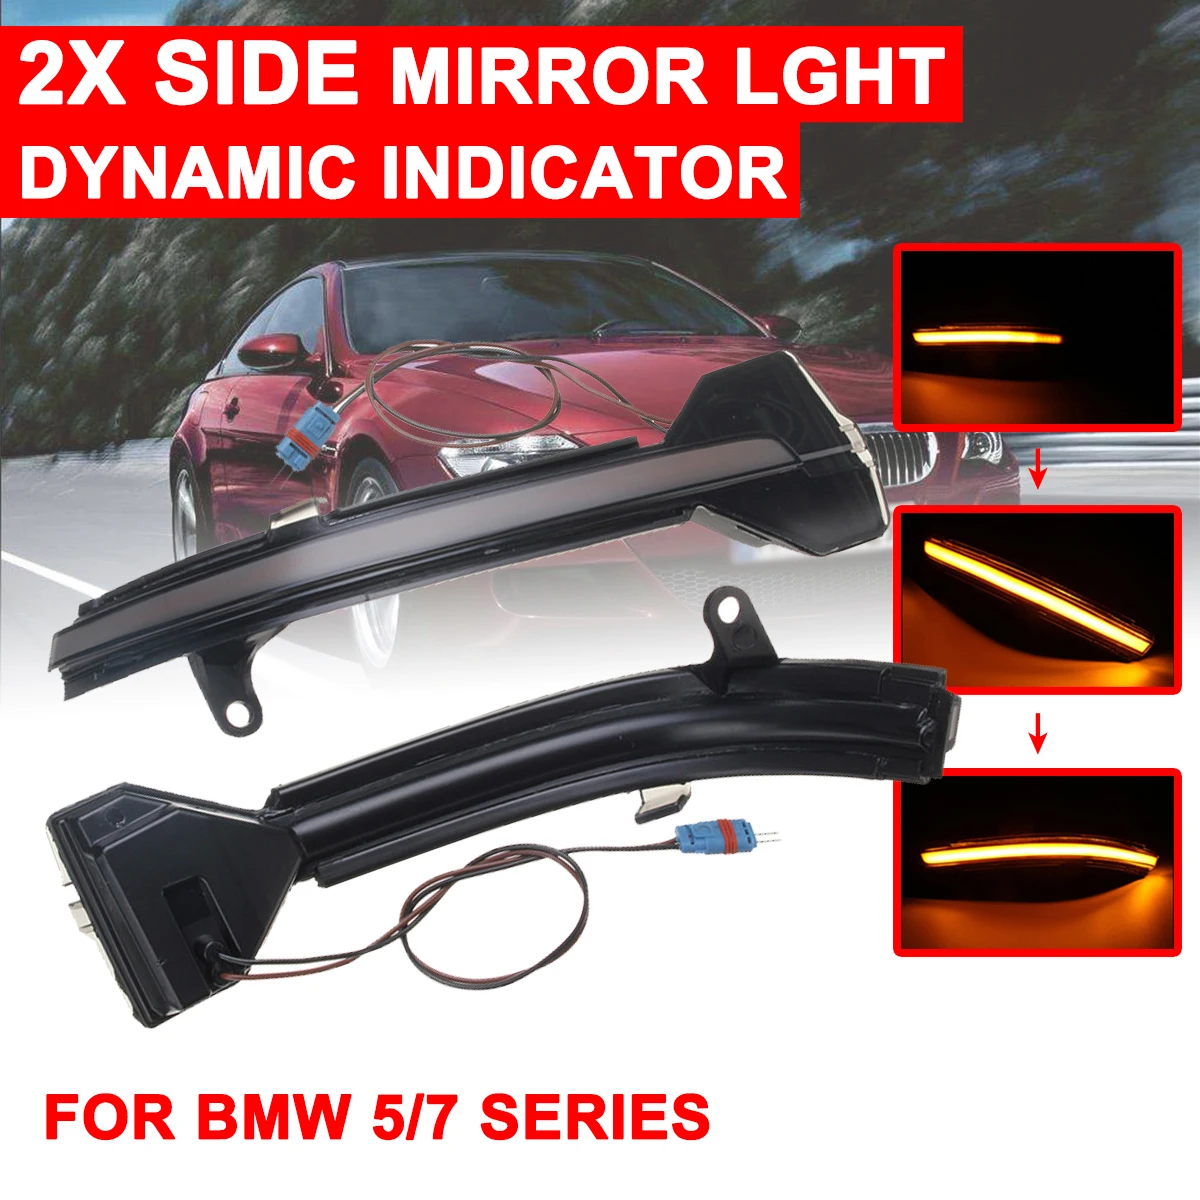 

1 Pair Rearview Mirror Signal Lamp Highlight LED Car Dynamic Turn Light Yellow for BMW 5 Series F10 F11 F07 F18 7 Series F01-03